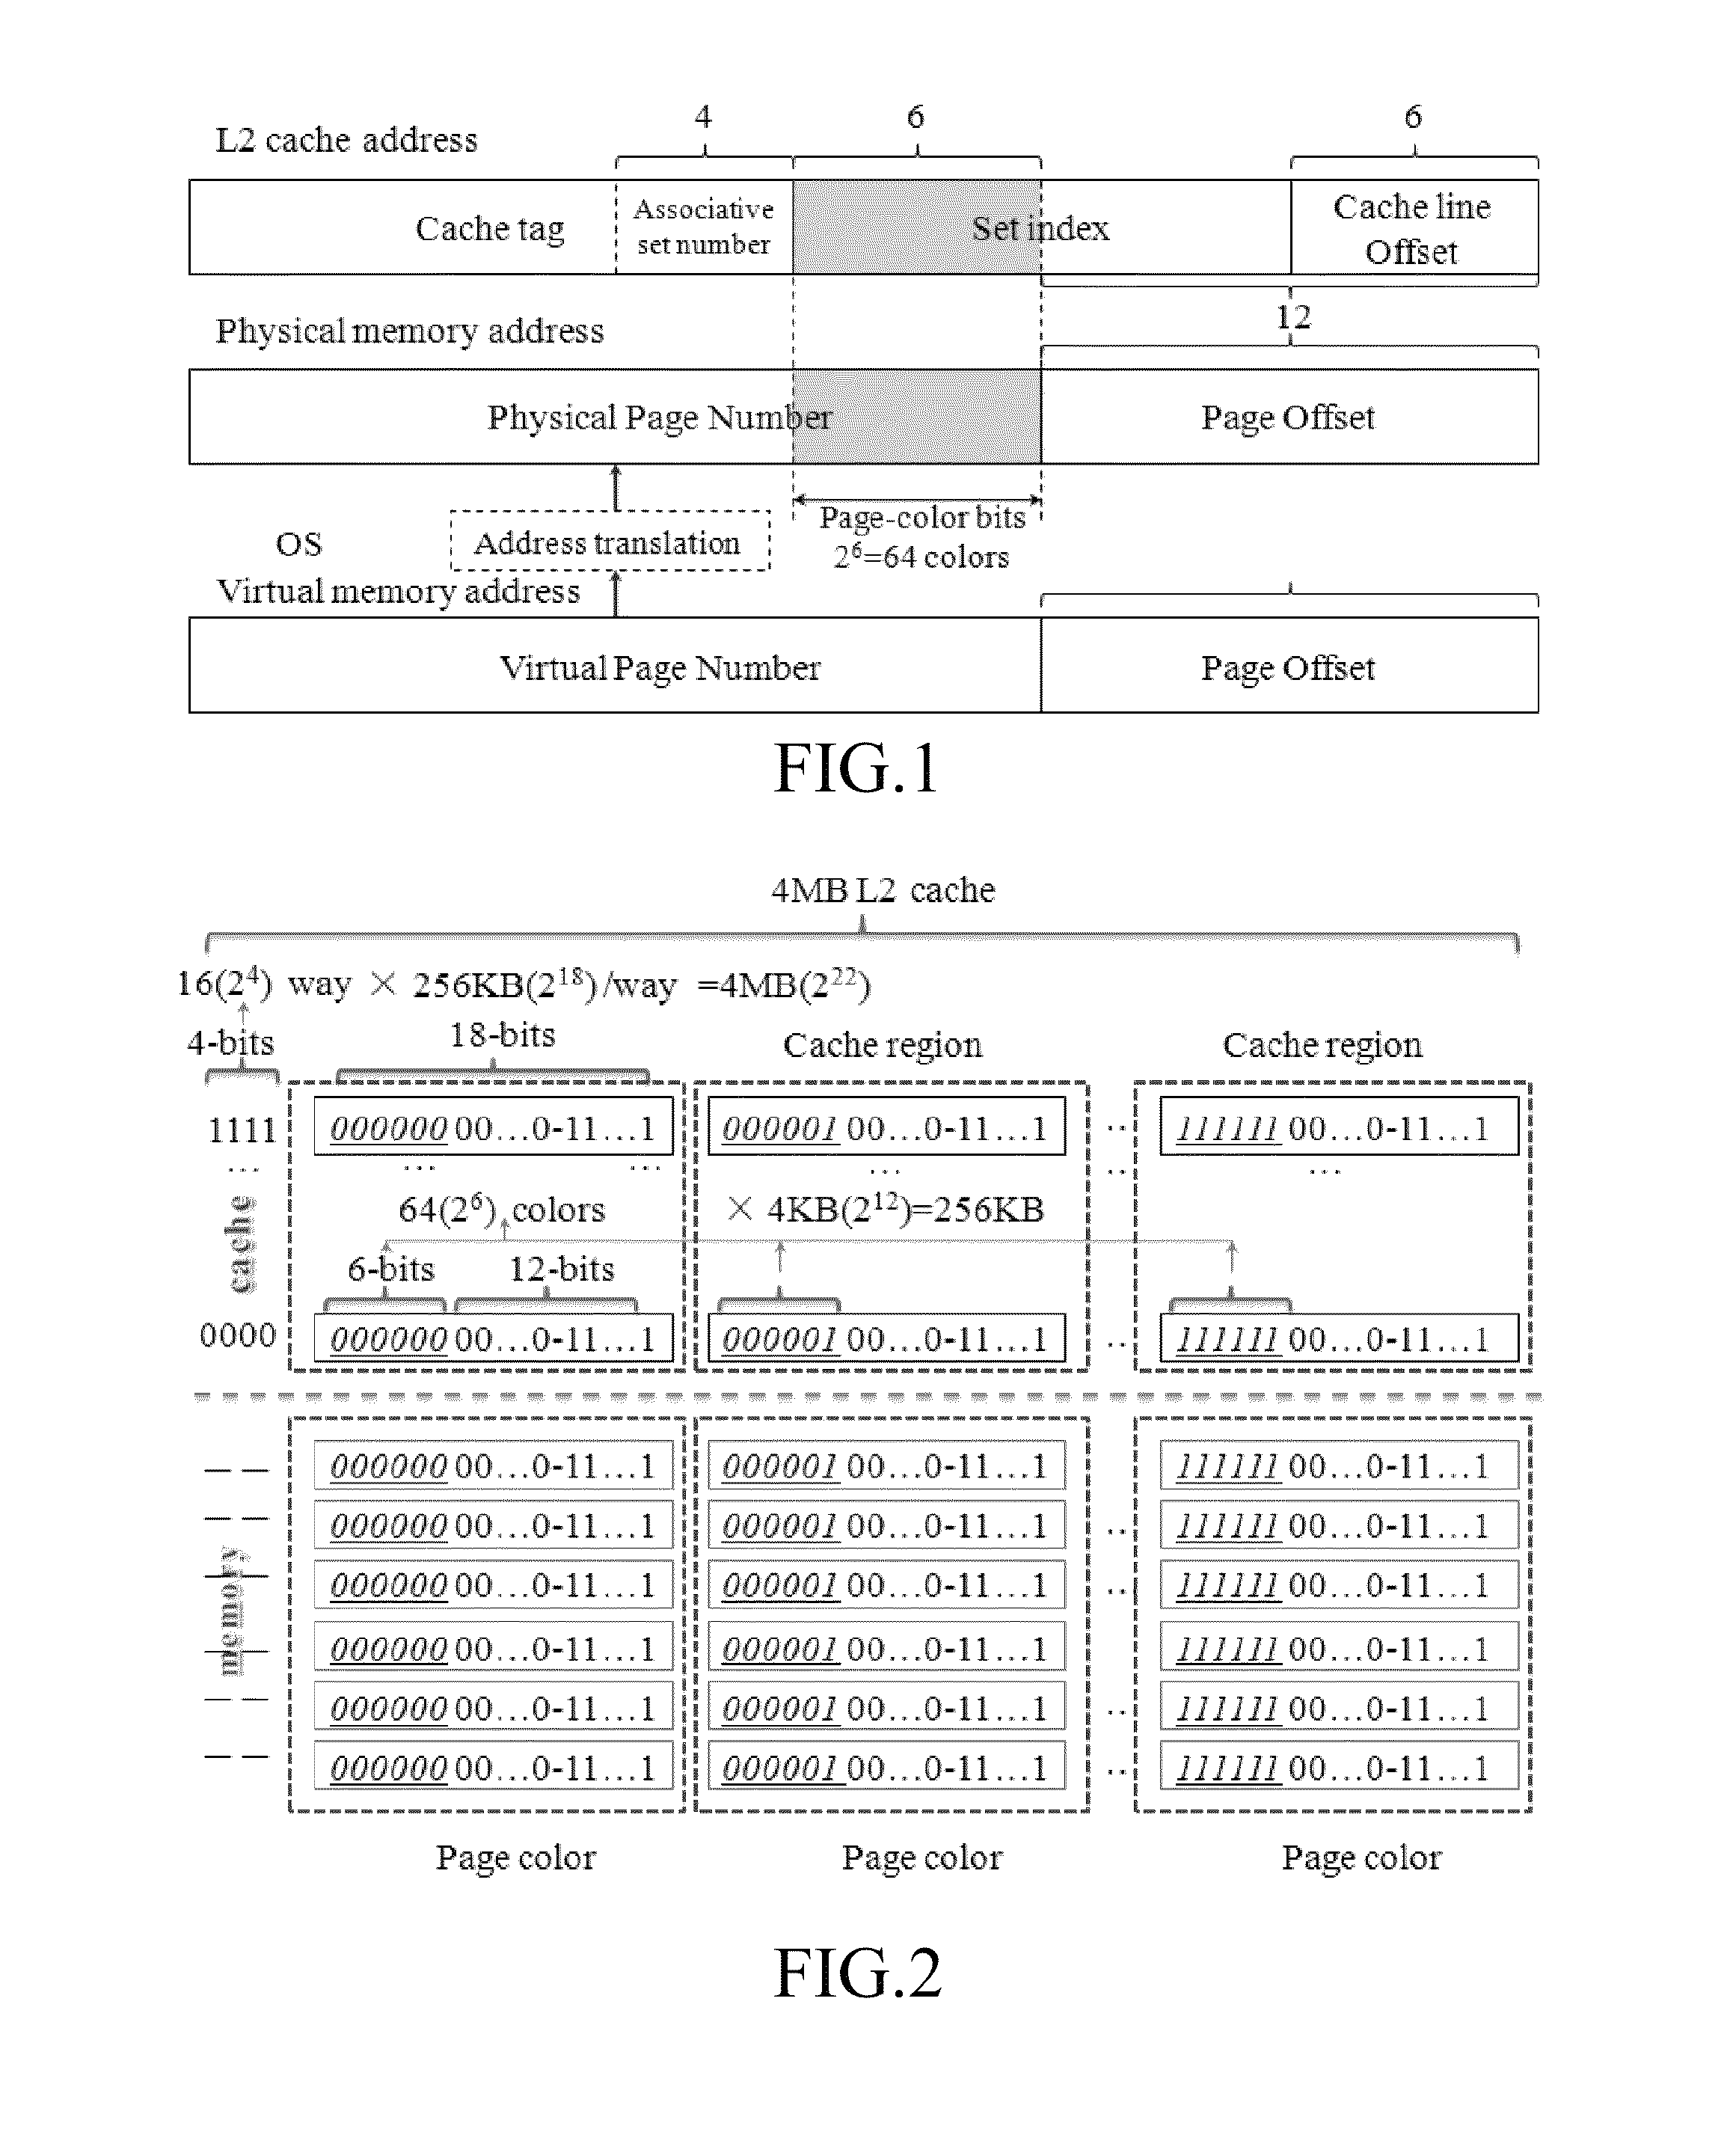 Access optimization method for main memory database based on page-coloring